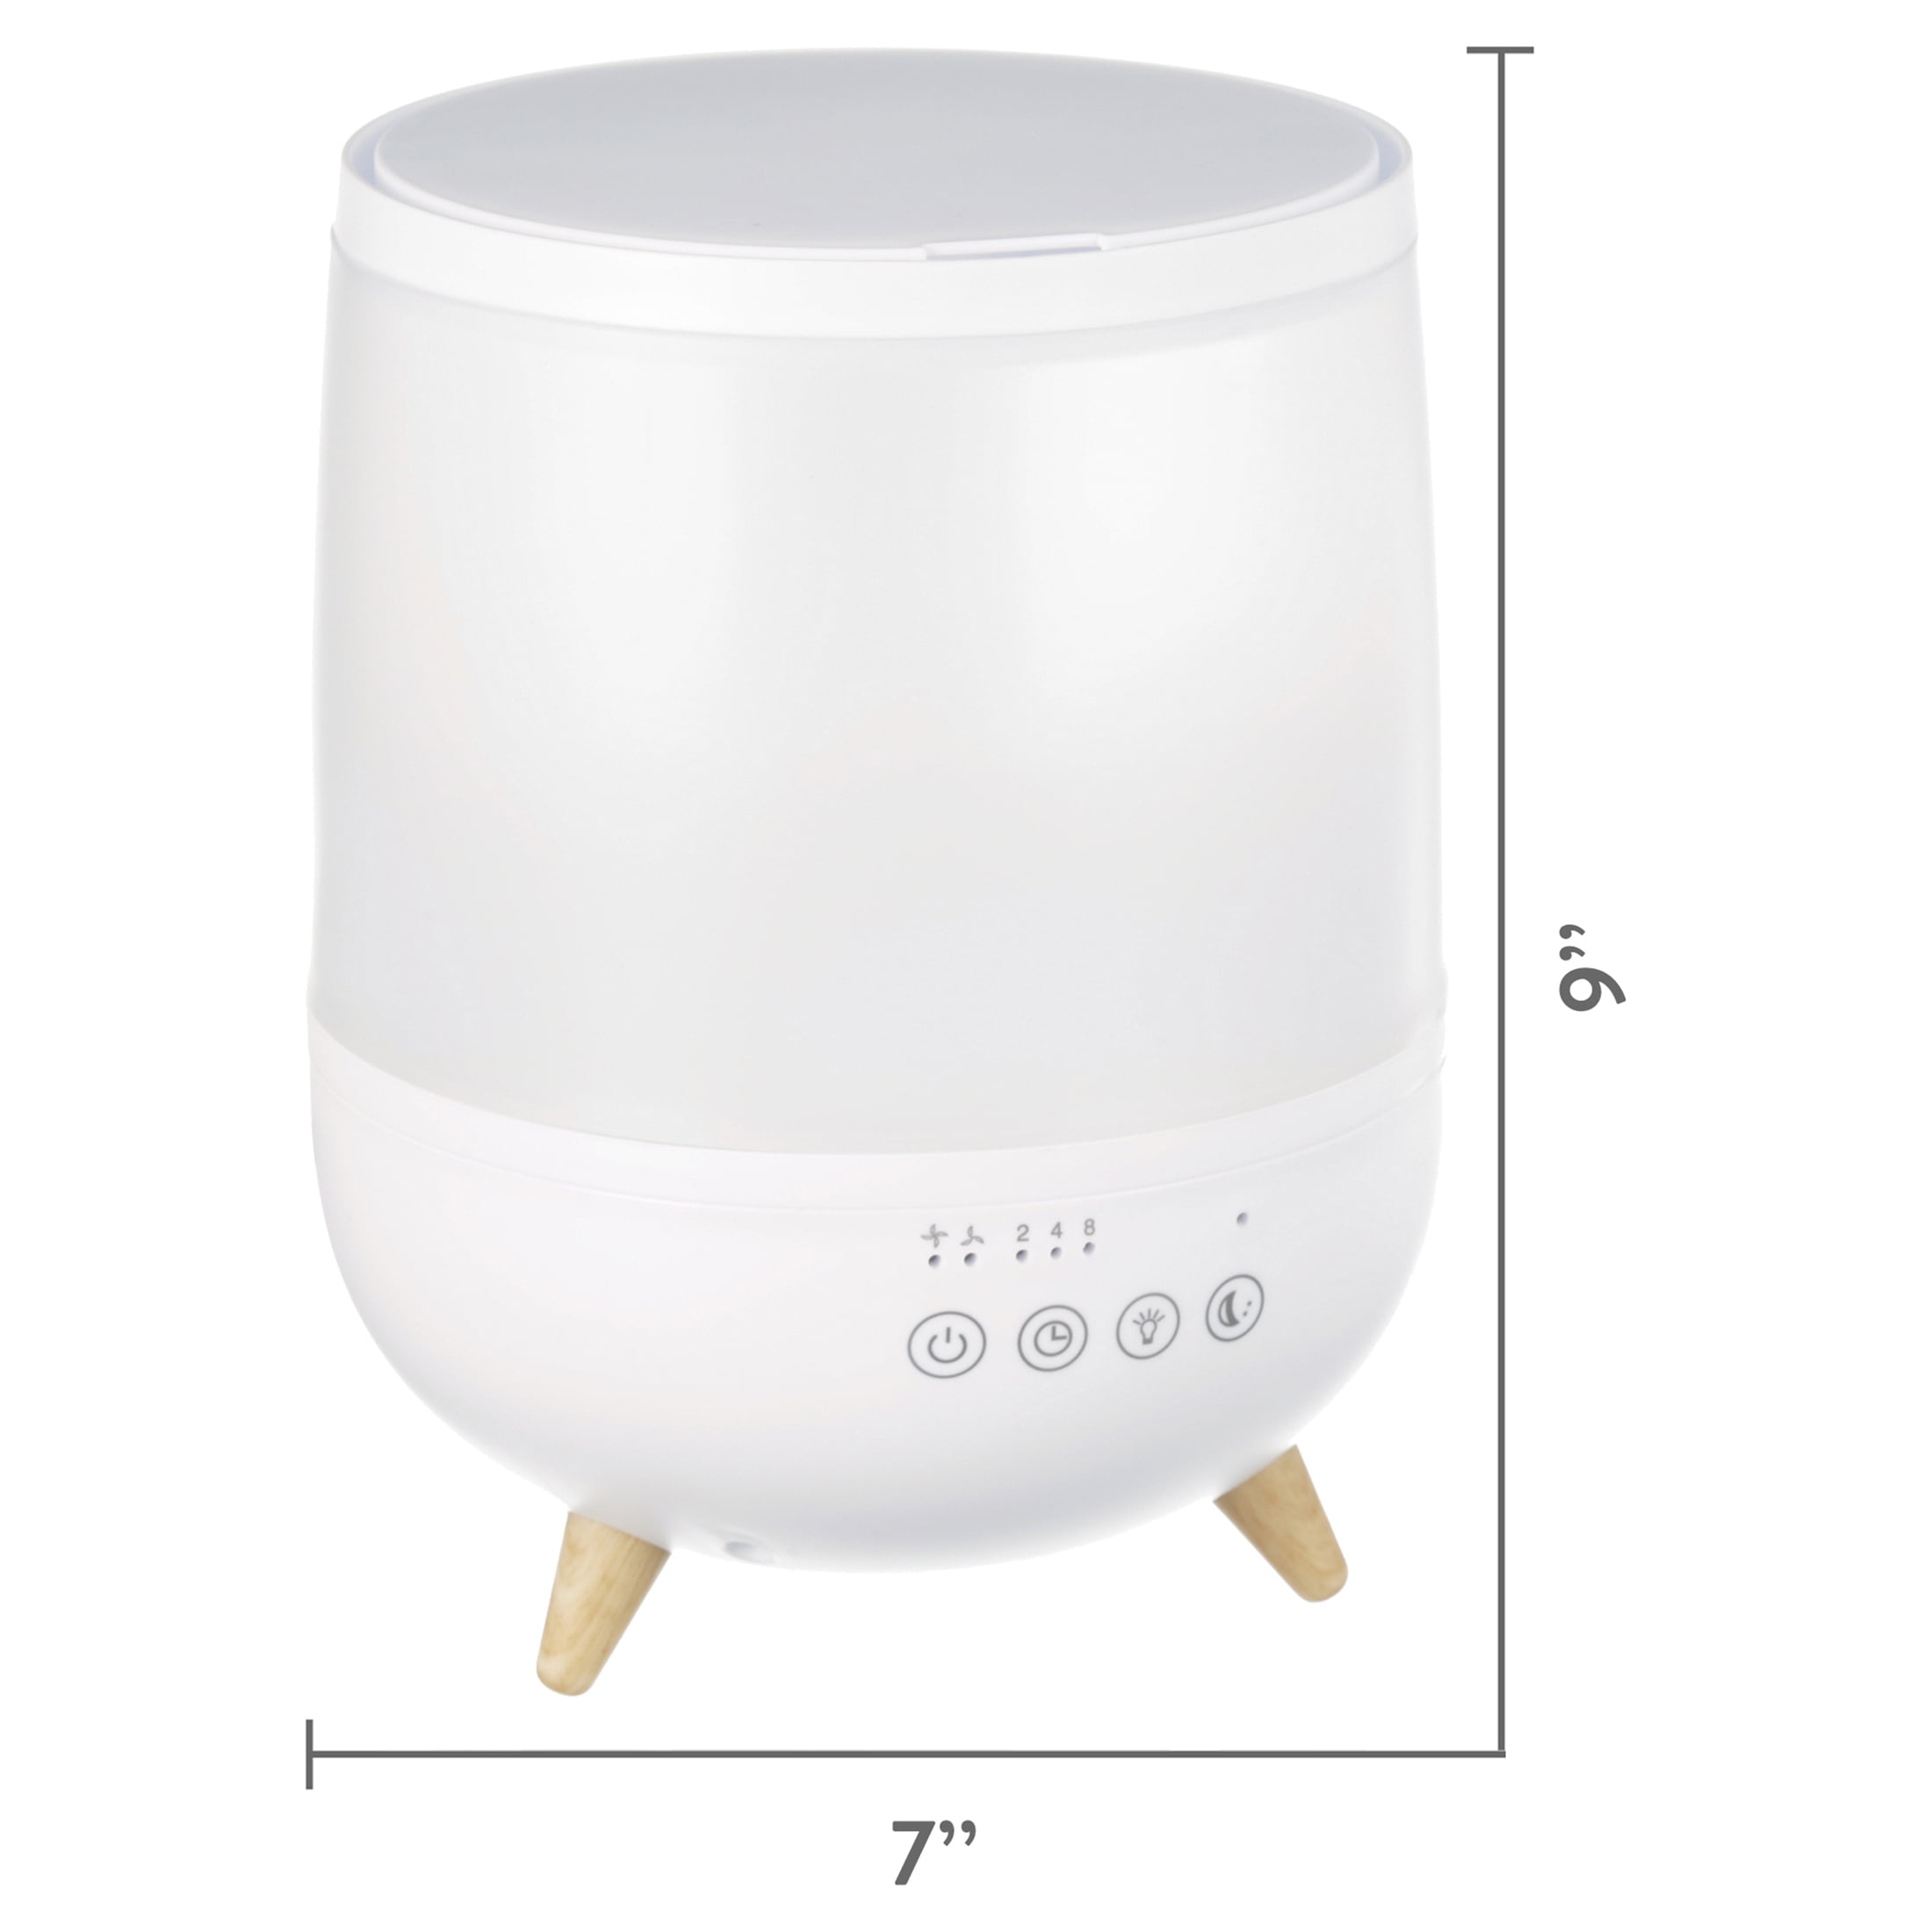 Recollection Successful Engrave Equate Ultrasonic Humidifier, Diffuser, Cool Mist, Visible Mist,  Filter-Free, 0.5 Gallon, White and wooden - Walmart.com